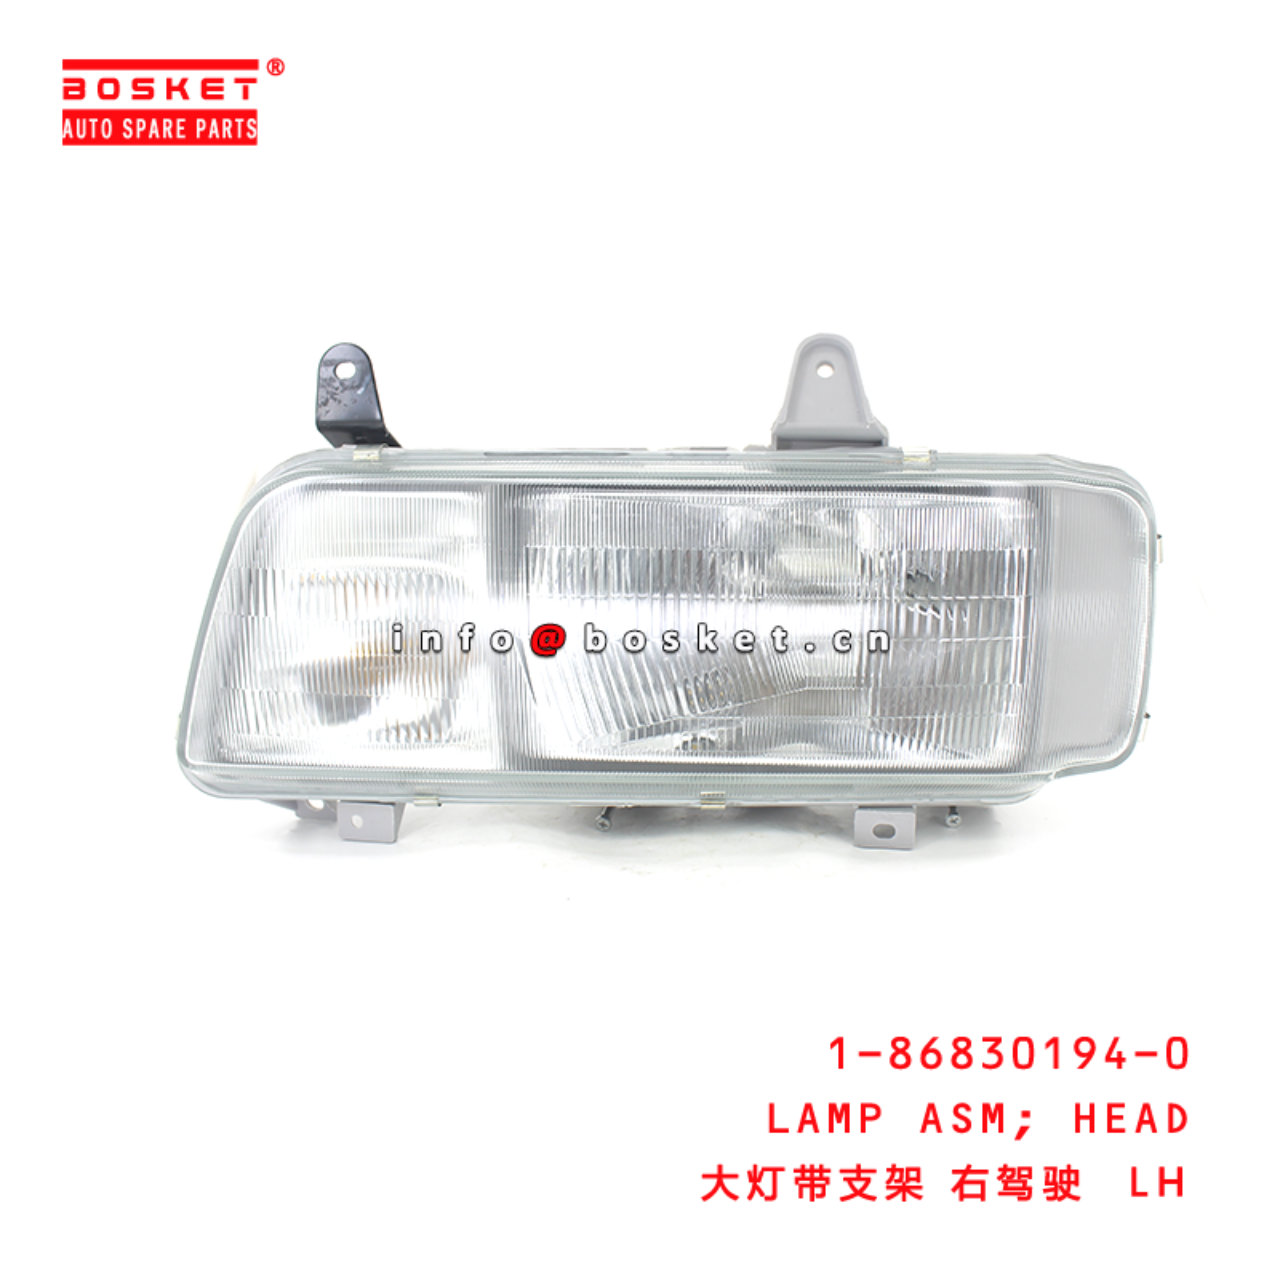 1-86830194-0 Head Lamp Assembly suitable for ISUZU FVR 1868301940